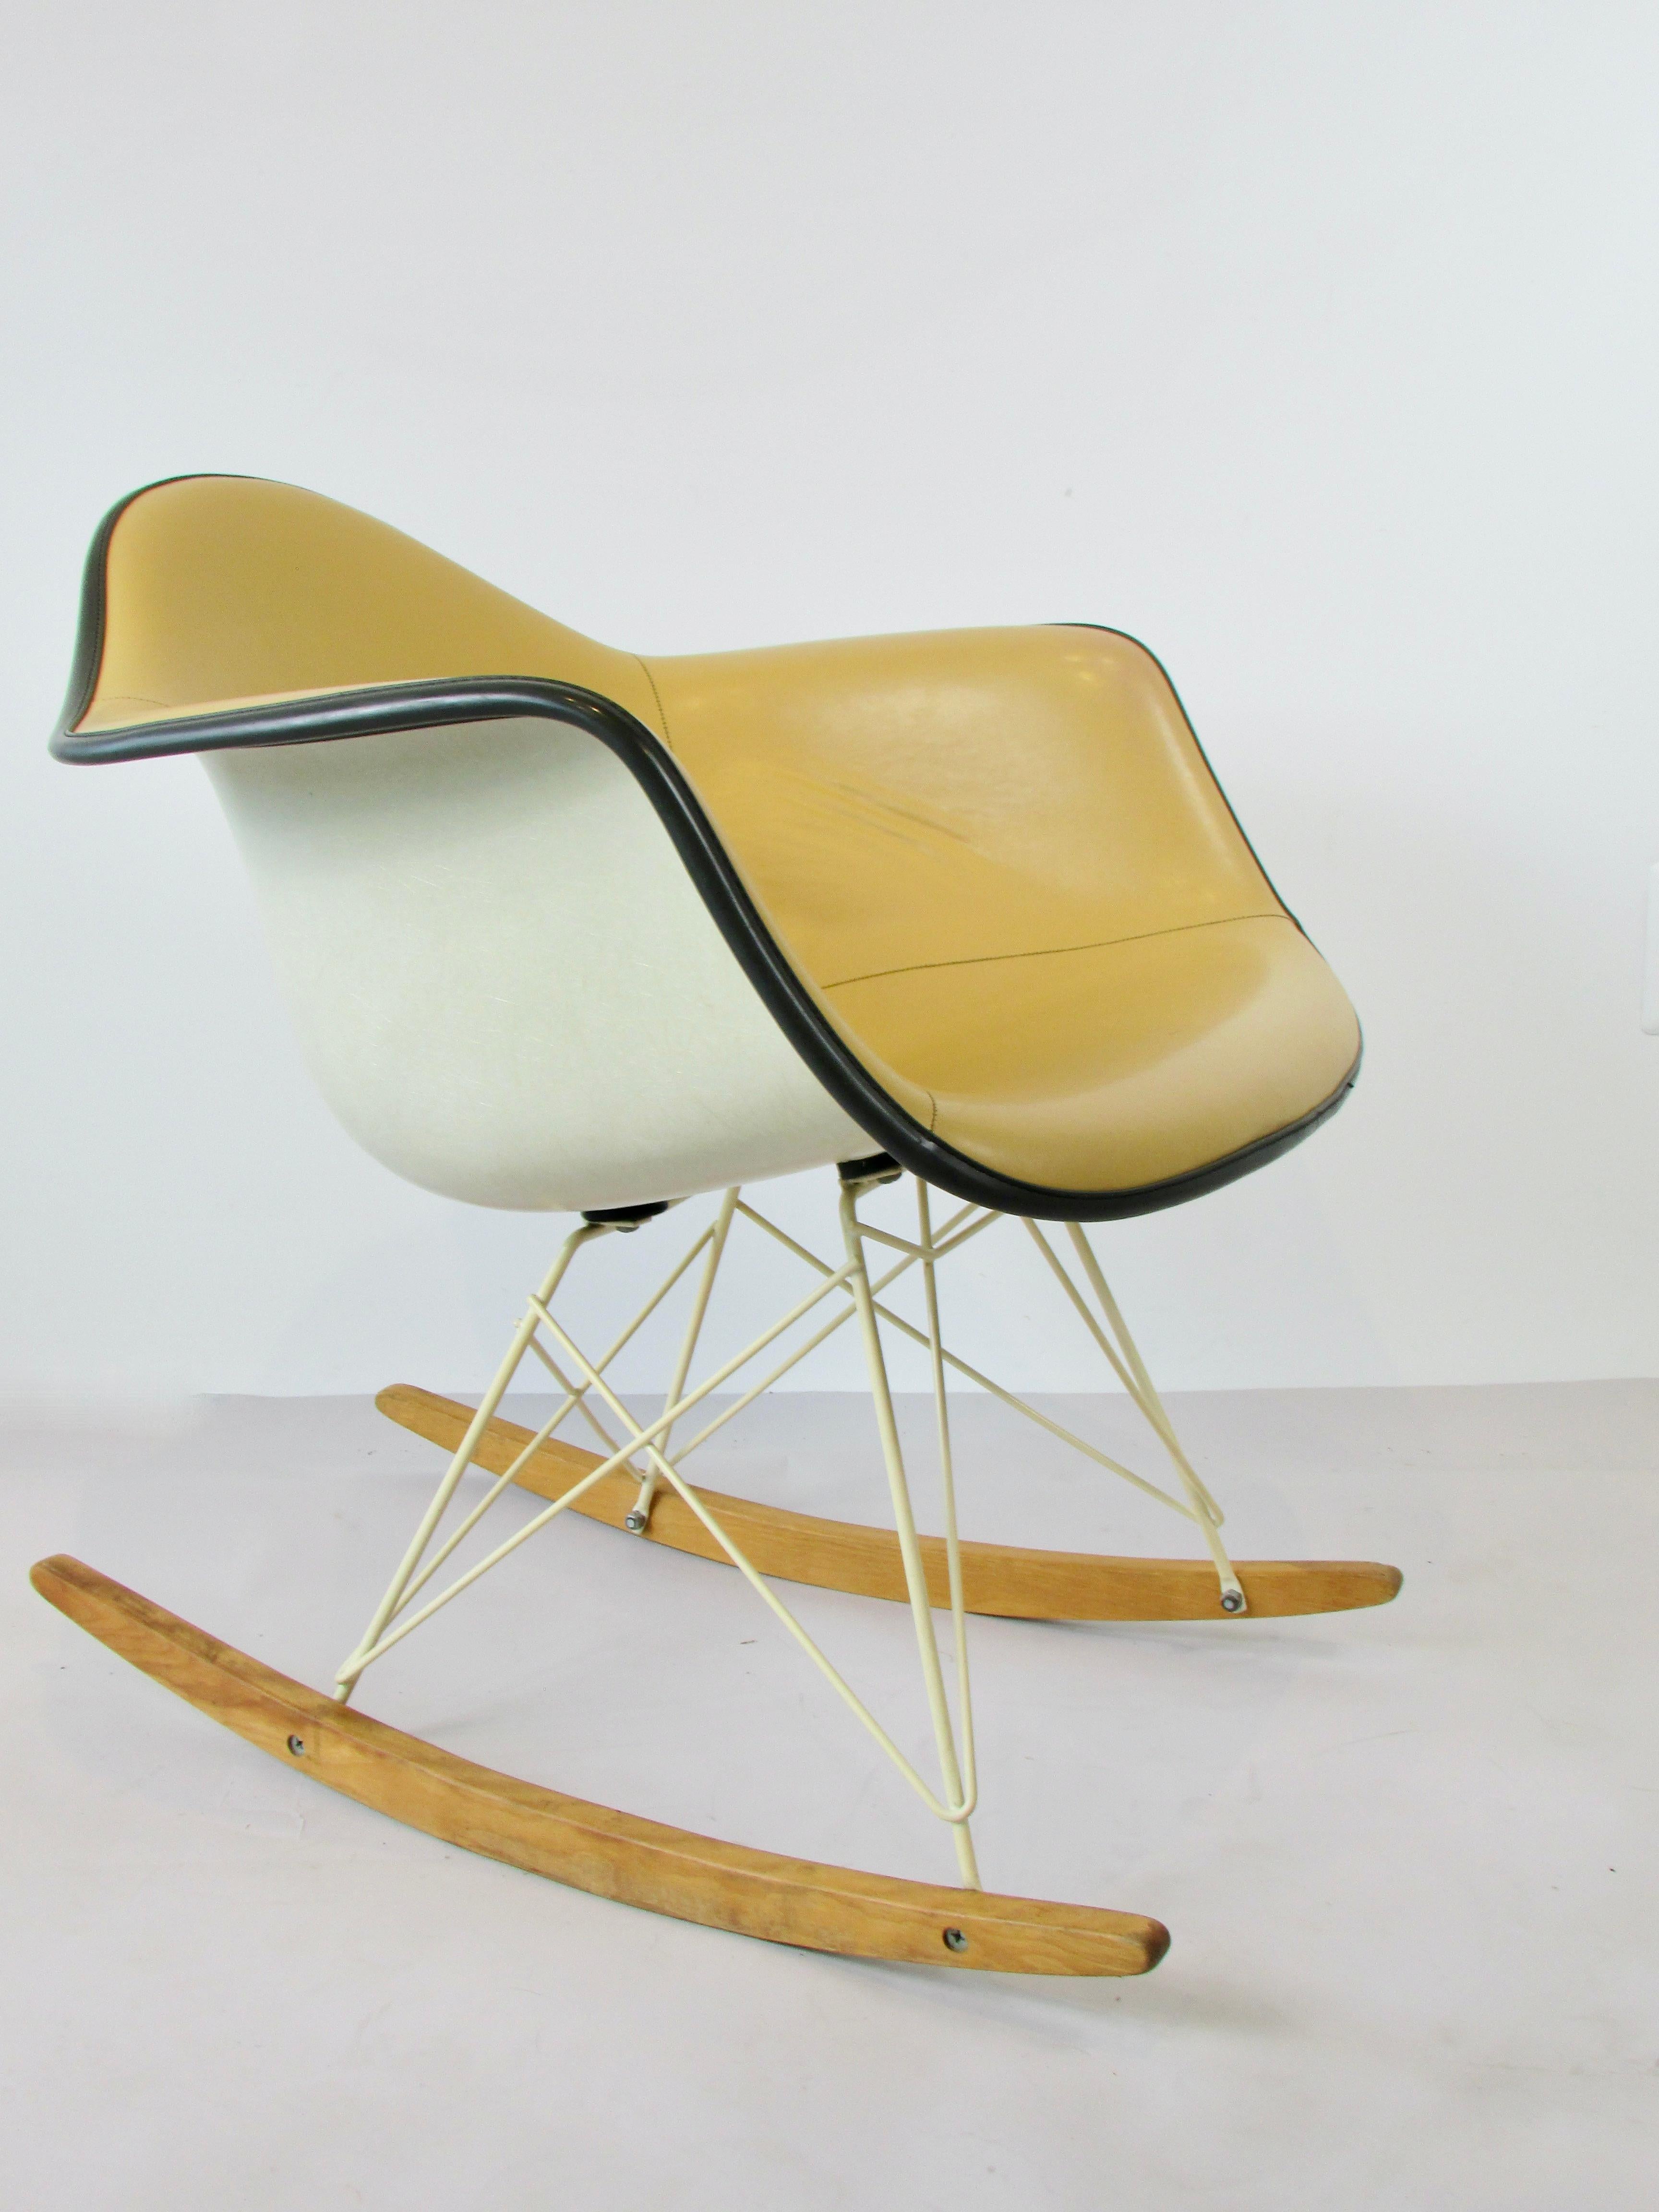 Charles and Ray Eames designed RAR rocking chair. Somewhat scarce or rarely seen coated white base. Fiberglass shell upholstered in butterscotch vinyl. Upholstery is puckering and pulling away from the shell. No rips or tears. The chair still sits